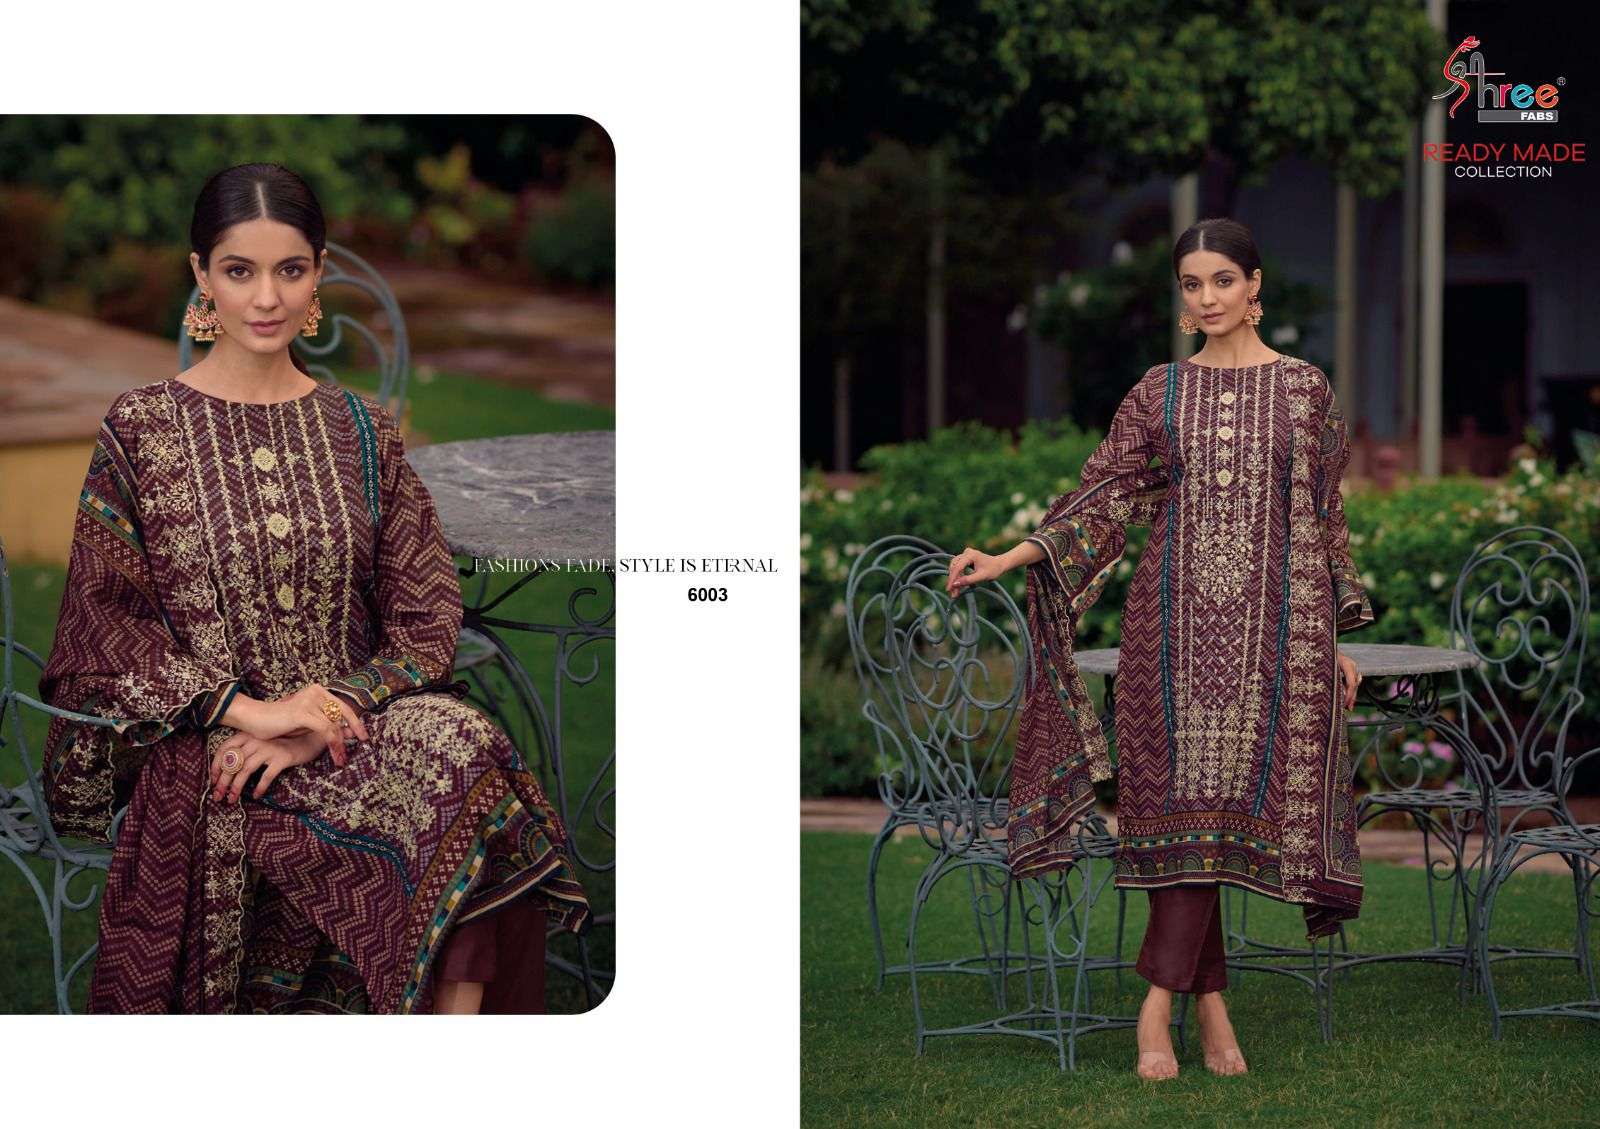 SHREE FABS BIN SAEED LAWN COLLECTION VOL 6 READY MADE COLLECTION